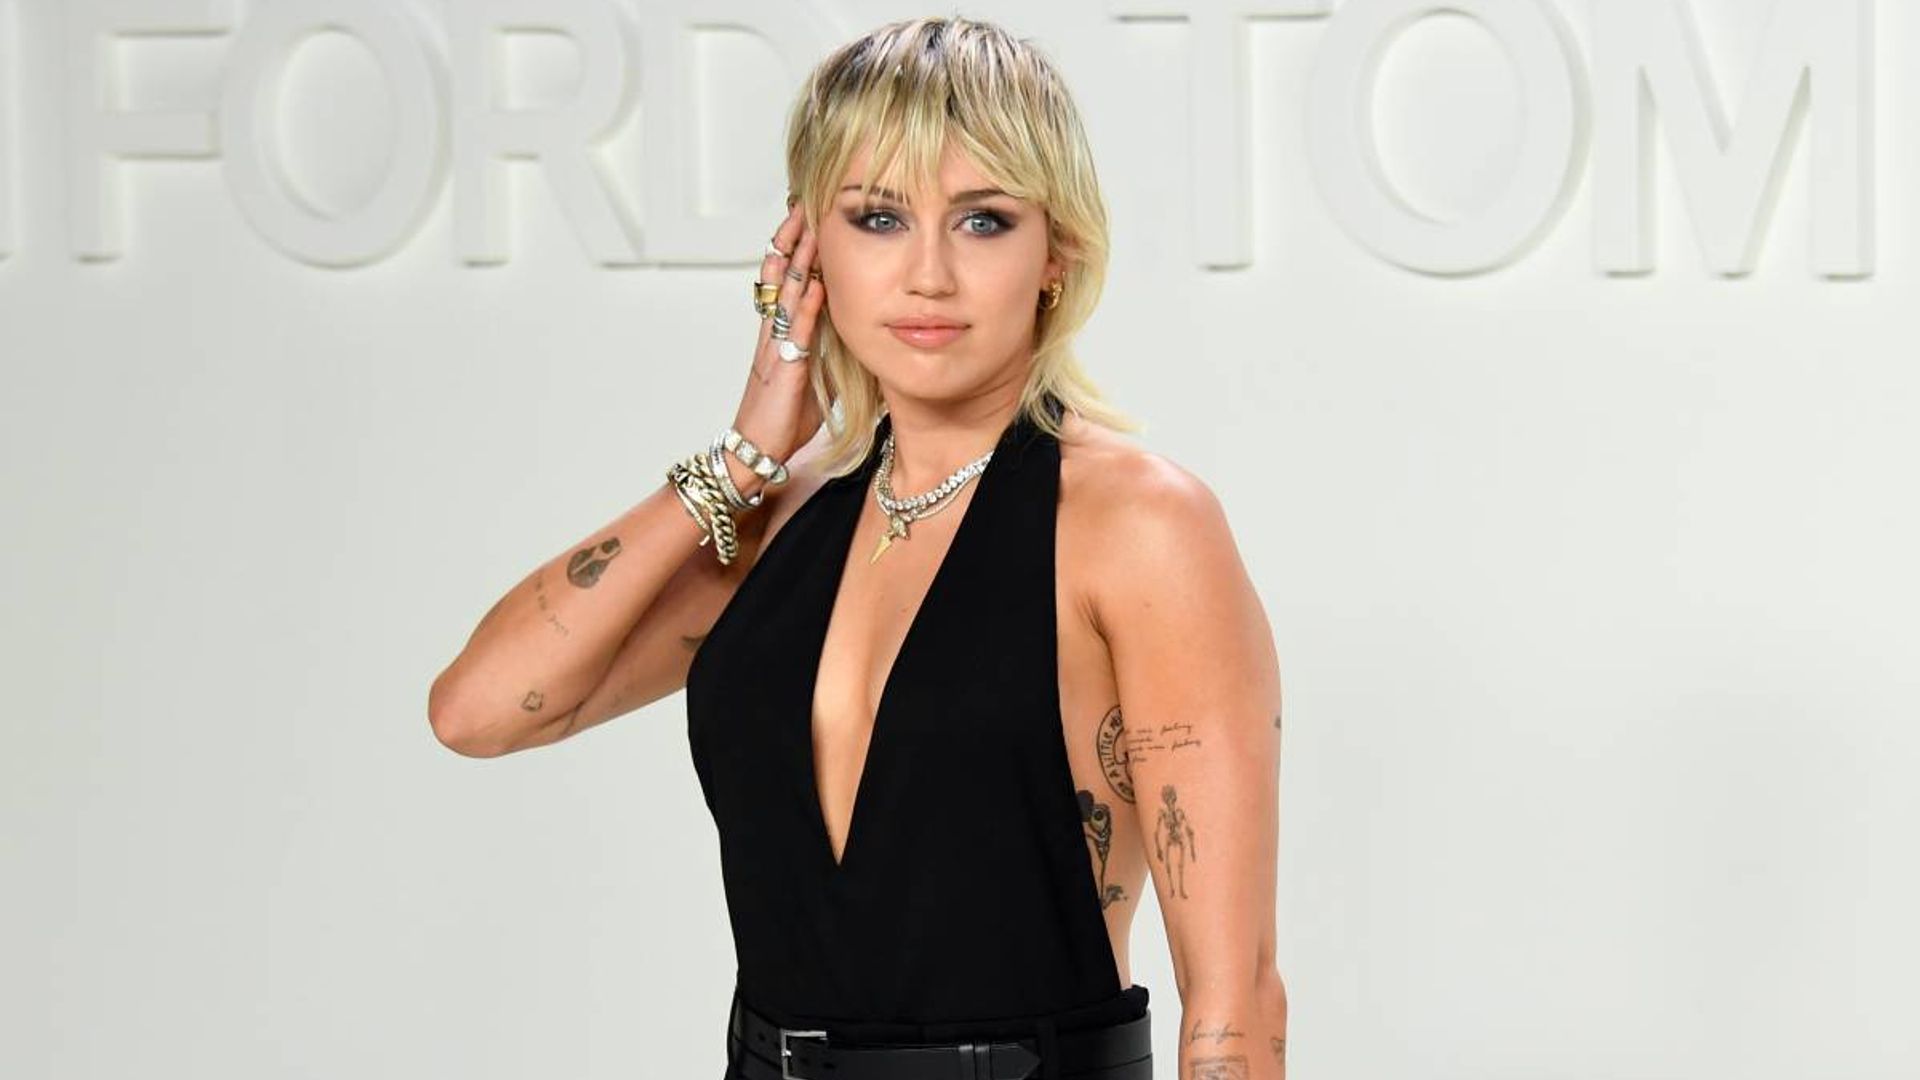 Miley Cyrus has been given the biggest transformation - and she loves it